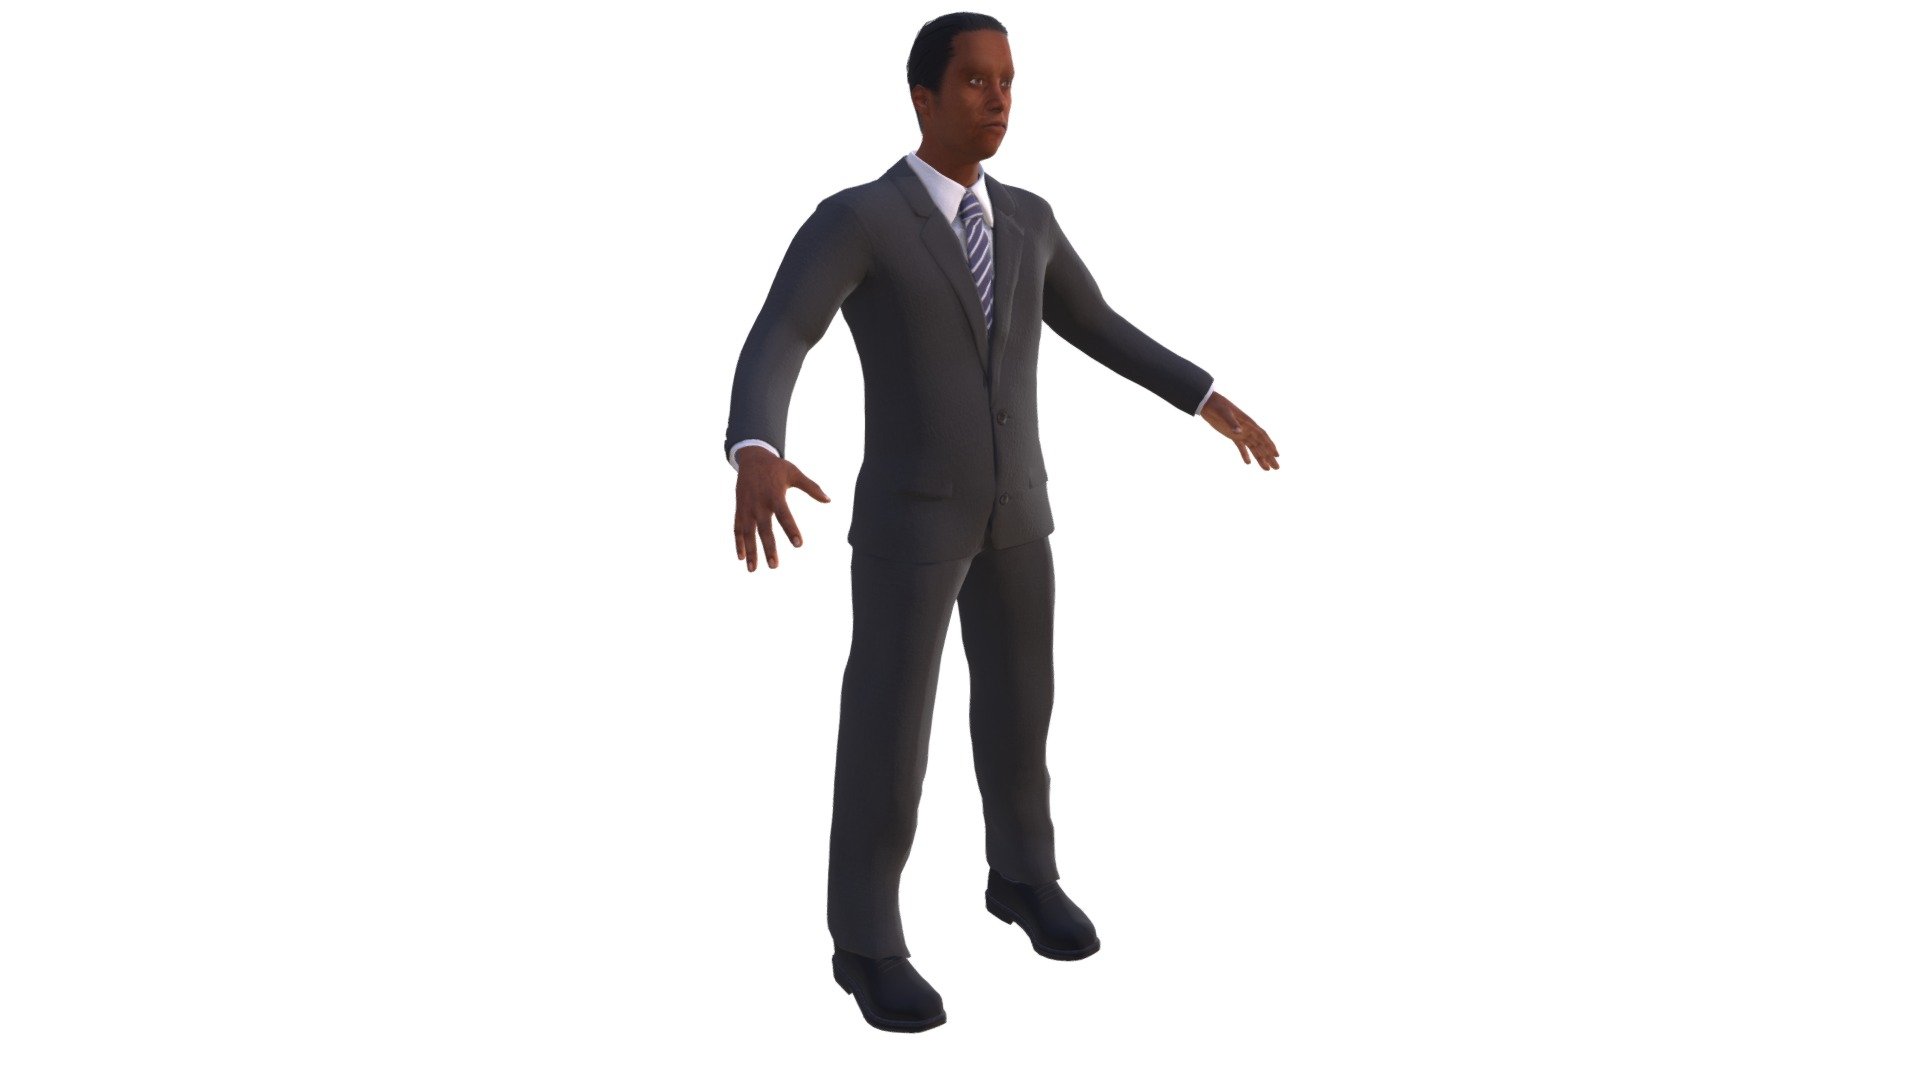 Man Character low-poly 3d model ready for Virtual Reality (VR), Augmented Reality (AR), games and other real-time apps.

Rigged human character elegant dressed. 
Facial rig and skeleton optimized for game engines.

Diffuse textures and UV map included.

37k polygons 19k vertices - Black Suit Character - 3D model by Free 3D Models (@free3dmodels) 3d model